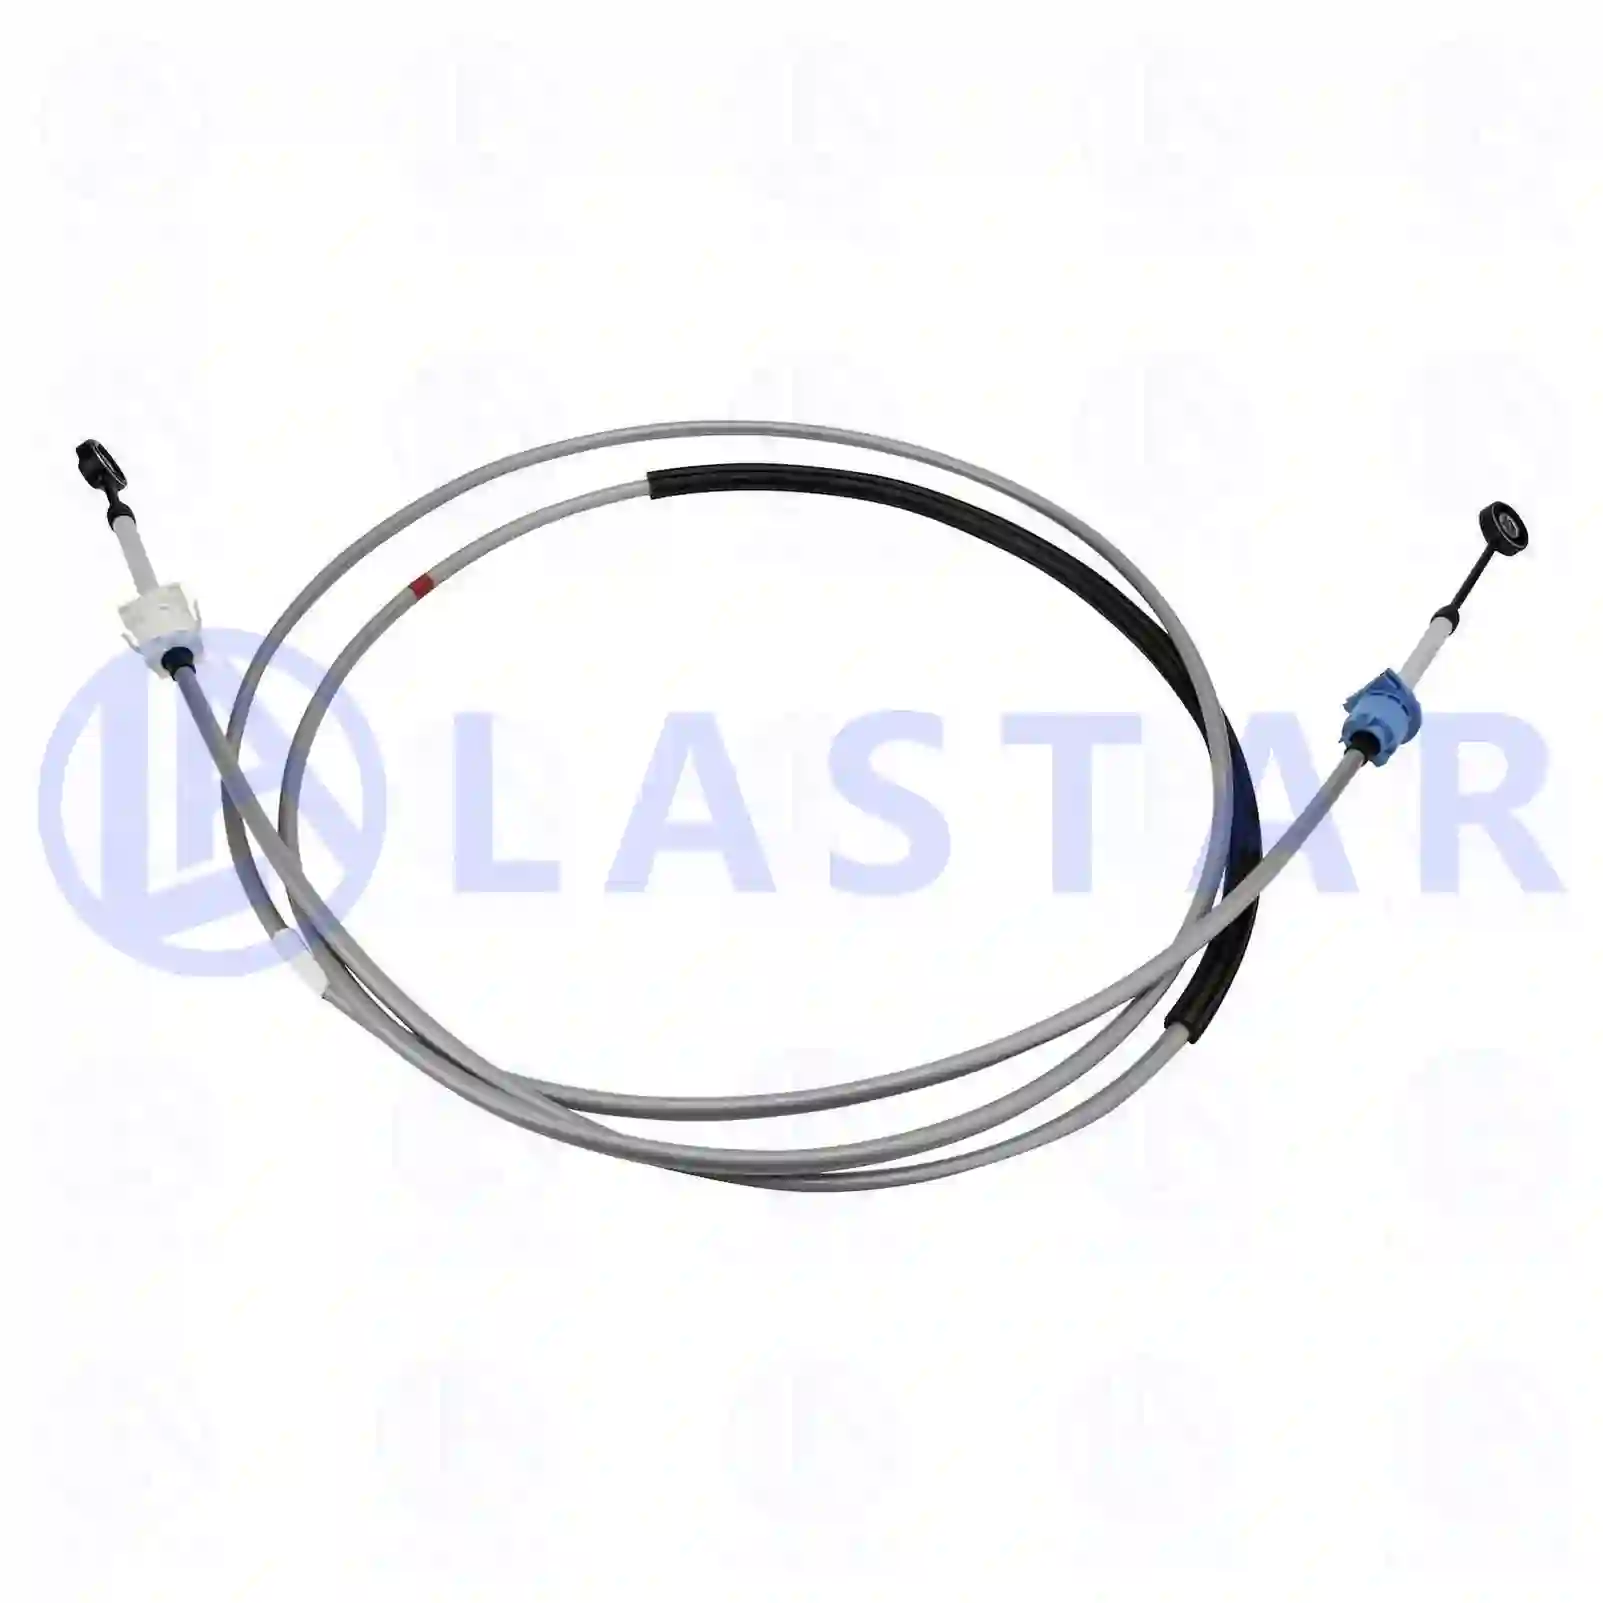 Control cable, switching, 77732439, 20545989, 20700989, 21002889, 21343589, 21789719, ZG21347-0008 ||  77732439 Lastar Spare Part | Truck Spare Parts, Auotomotive Spare Parts Control cable, switching, 77732439, 20545989, 20700989, 21002889, 21343589, 21789719, ZG21347-0008 ||  77732439 Lastar Spare Part | Truck Spare Parts, Auotomotive Spare Parts